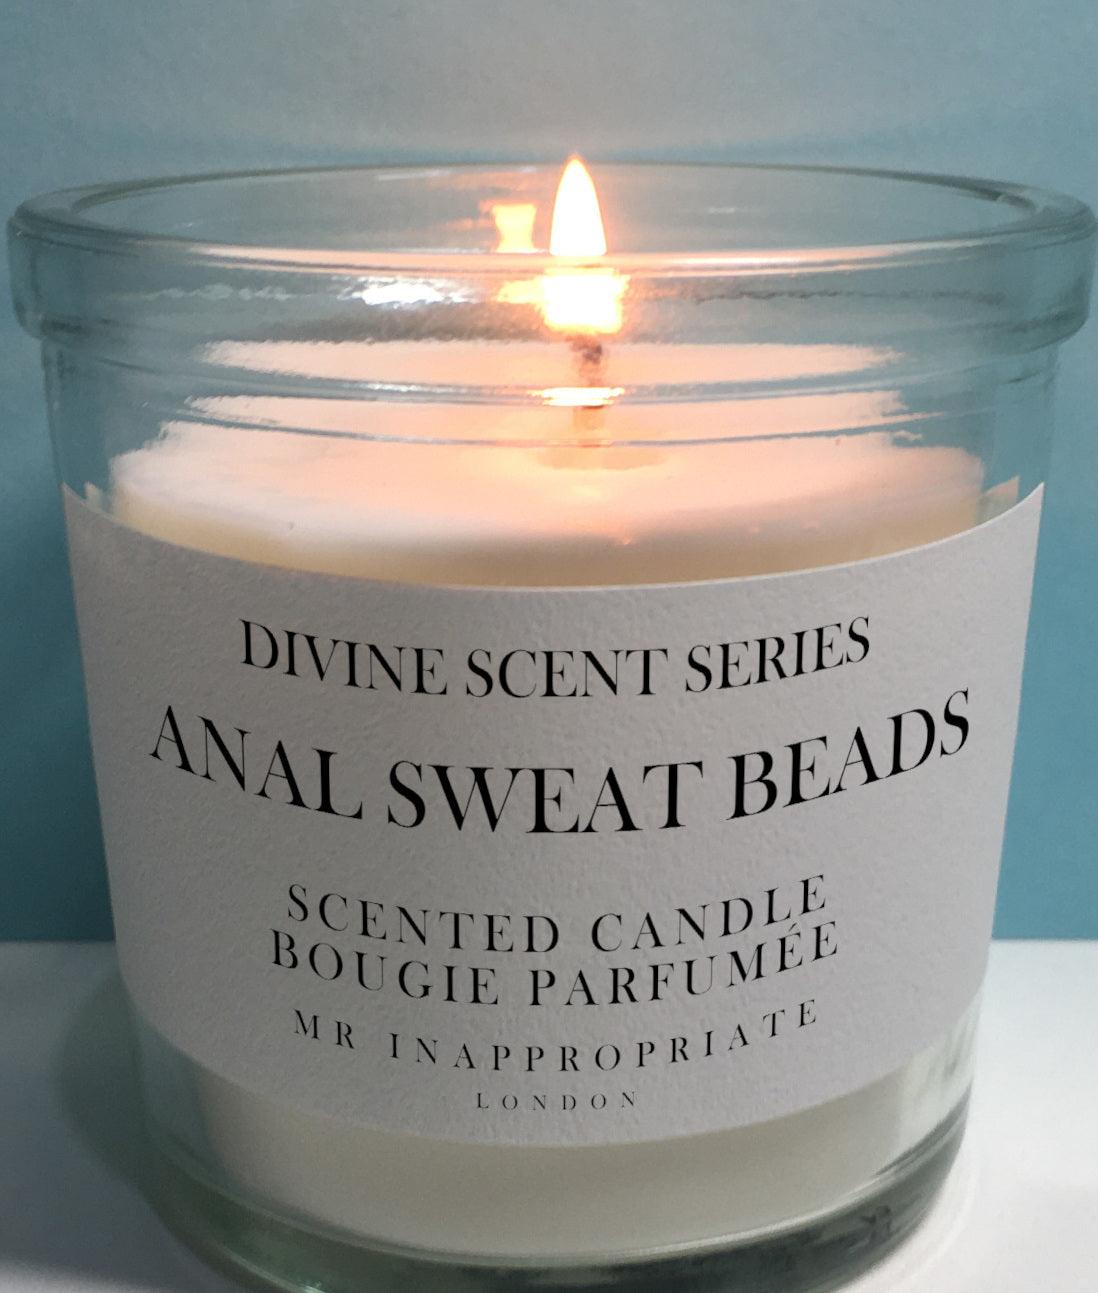 Candle - Sweat Beads - Mr. Inappropriate 